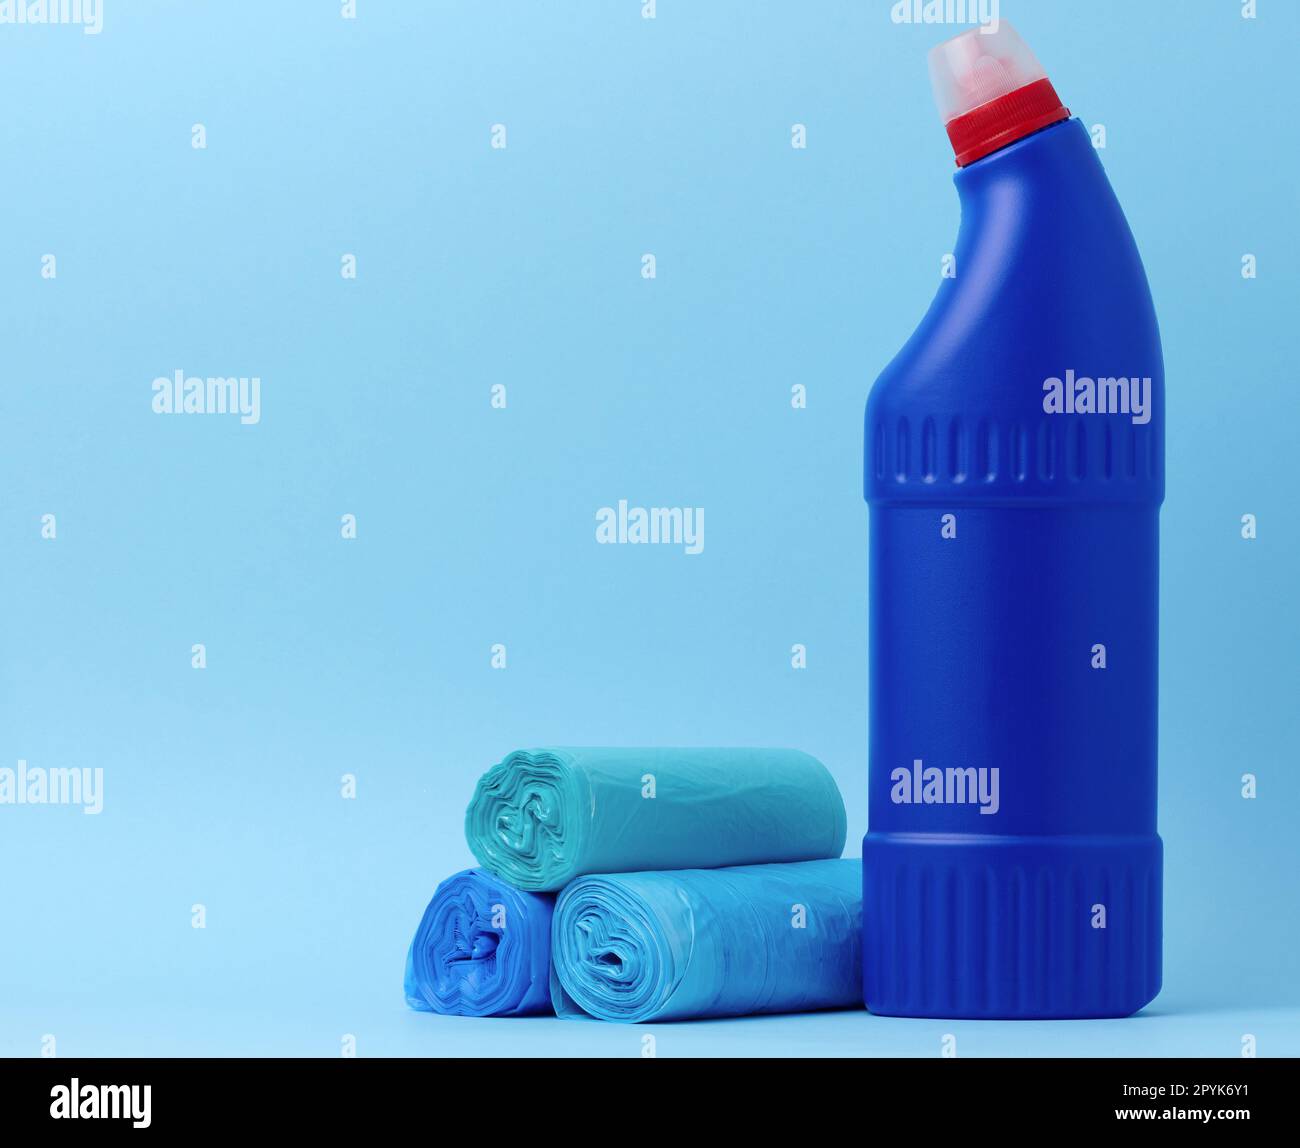 Garbage bags and a blue bottle with detergent on a blue background Stock Photo